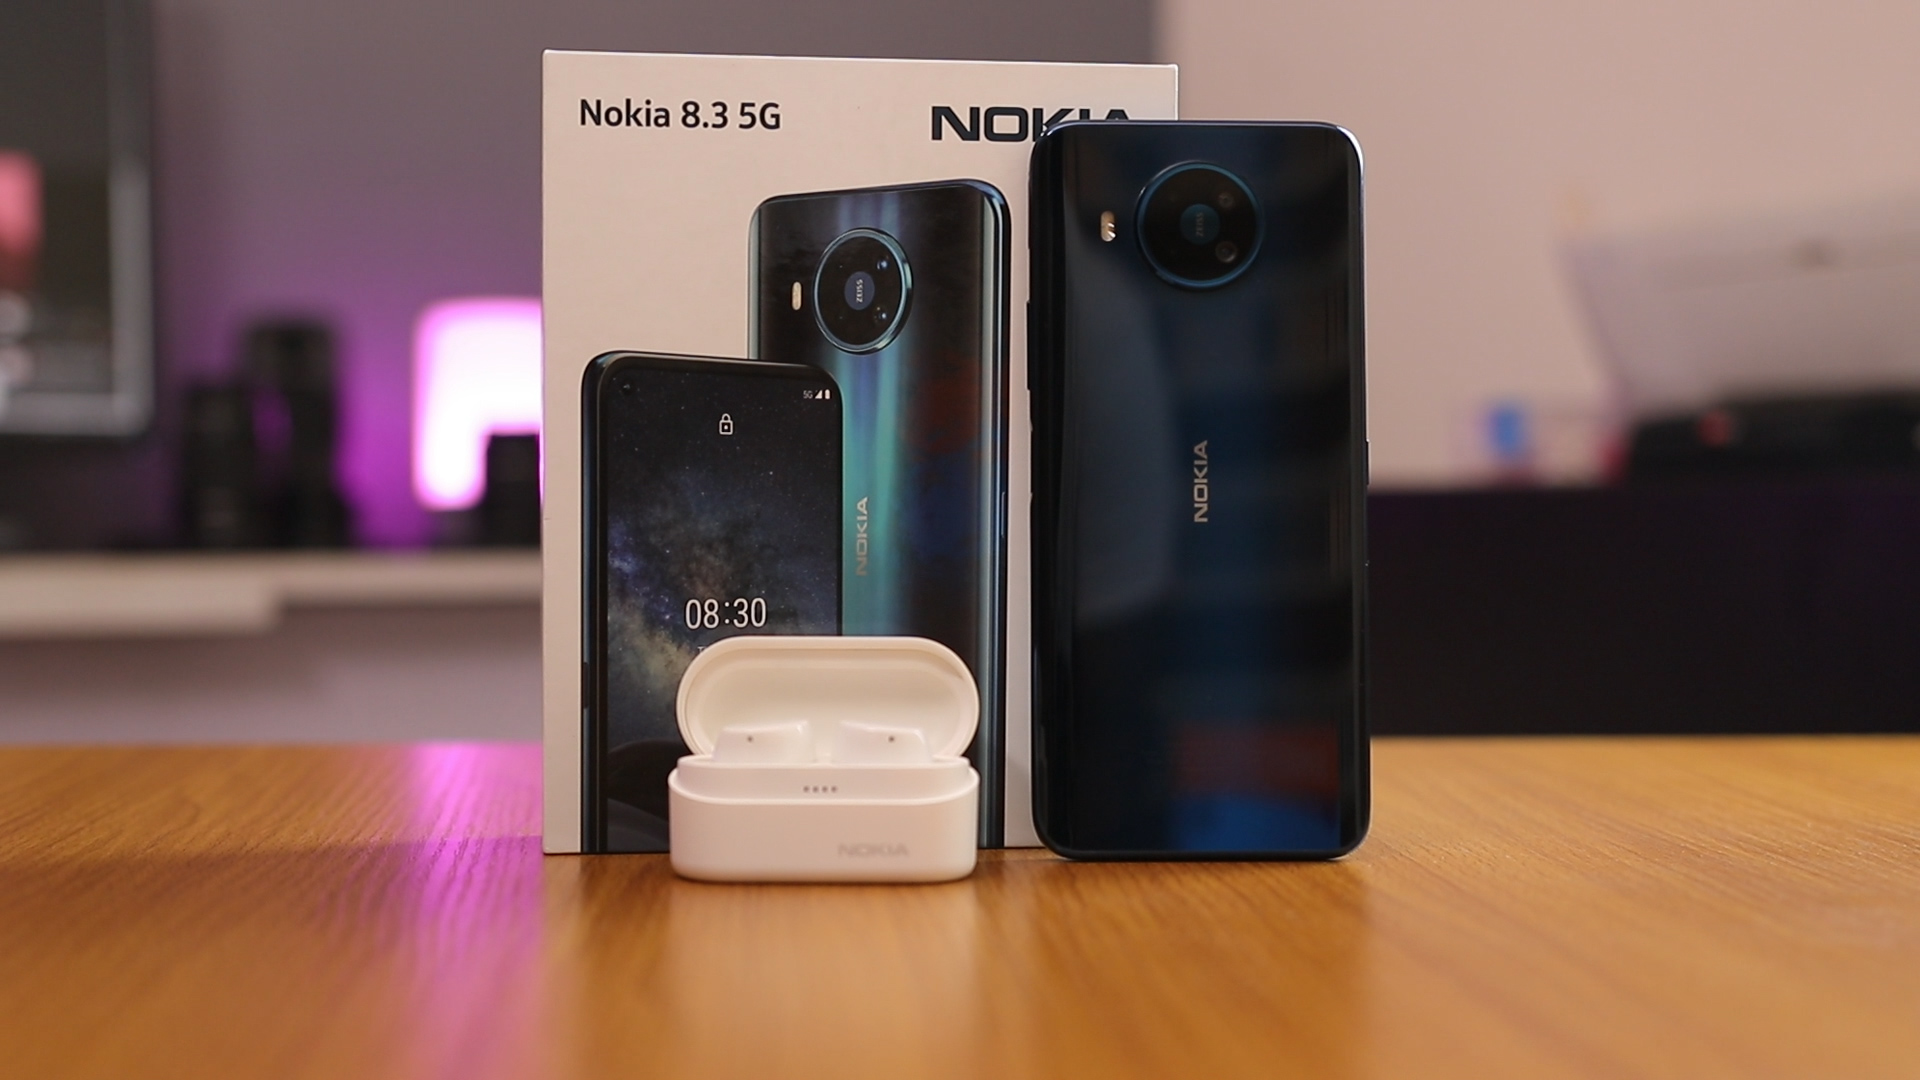 HMD Global, the Home of Nokia phones, brings significant step change to its smartphone category with Nokia 8.3 5G, Nokia 3.4 and Nokia 2.4